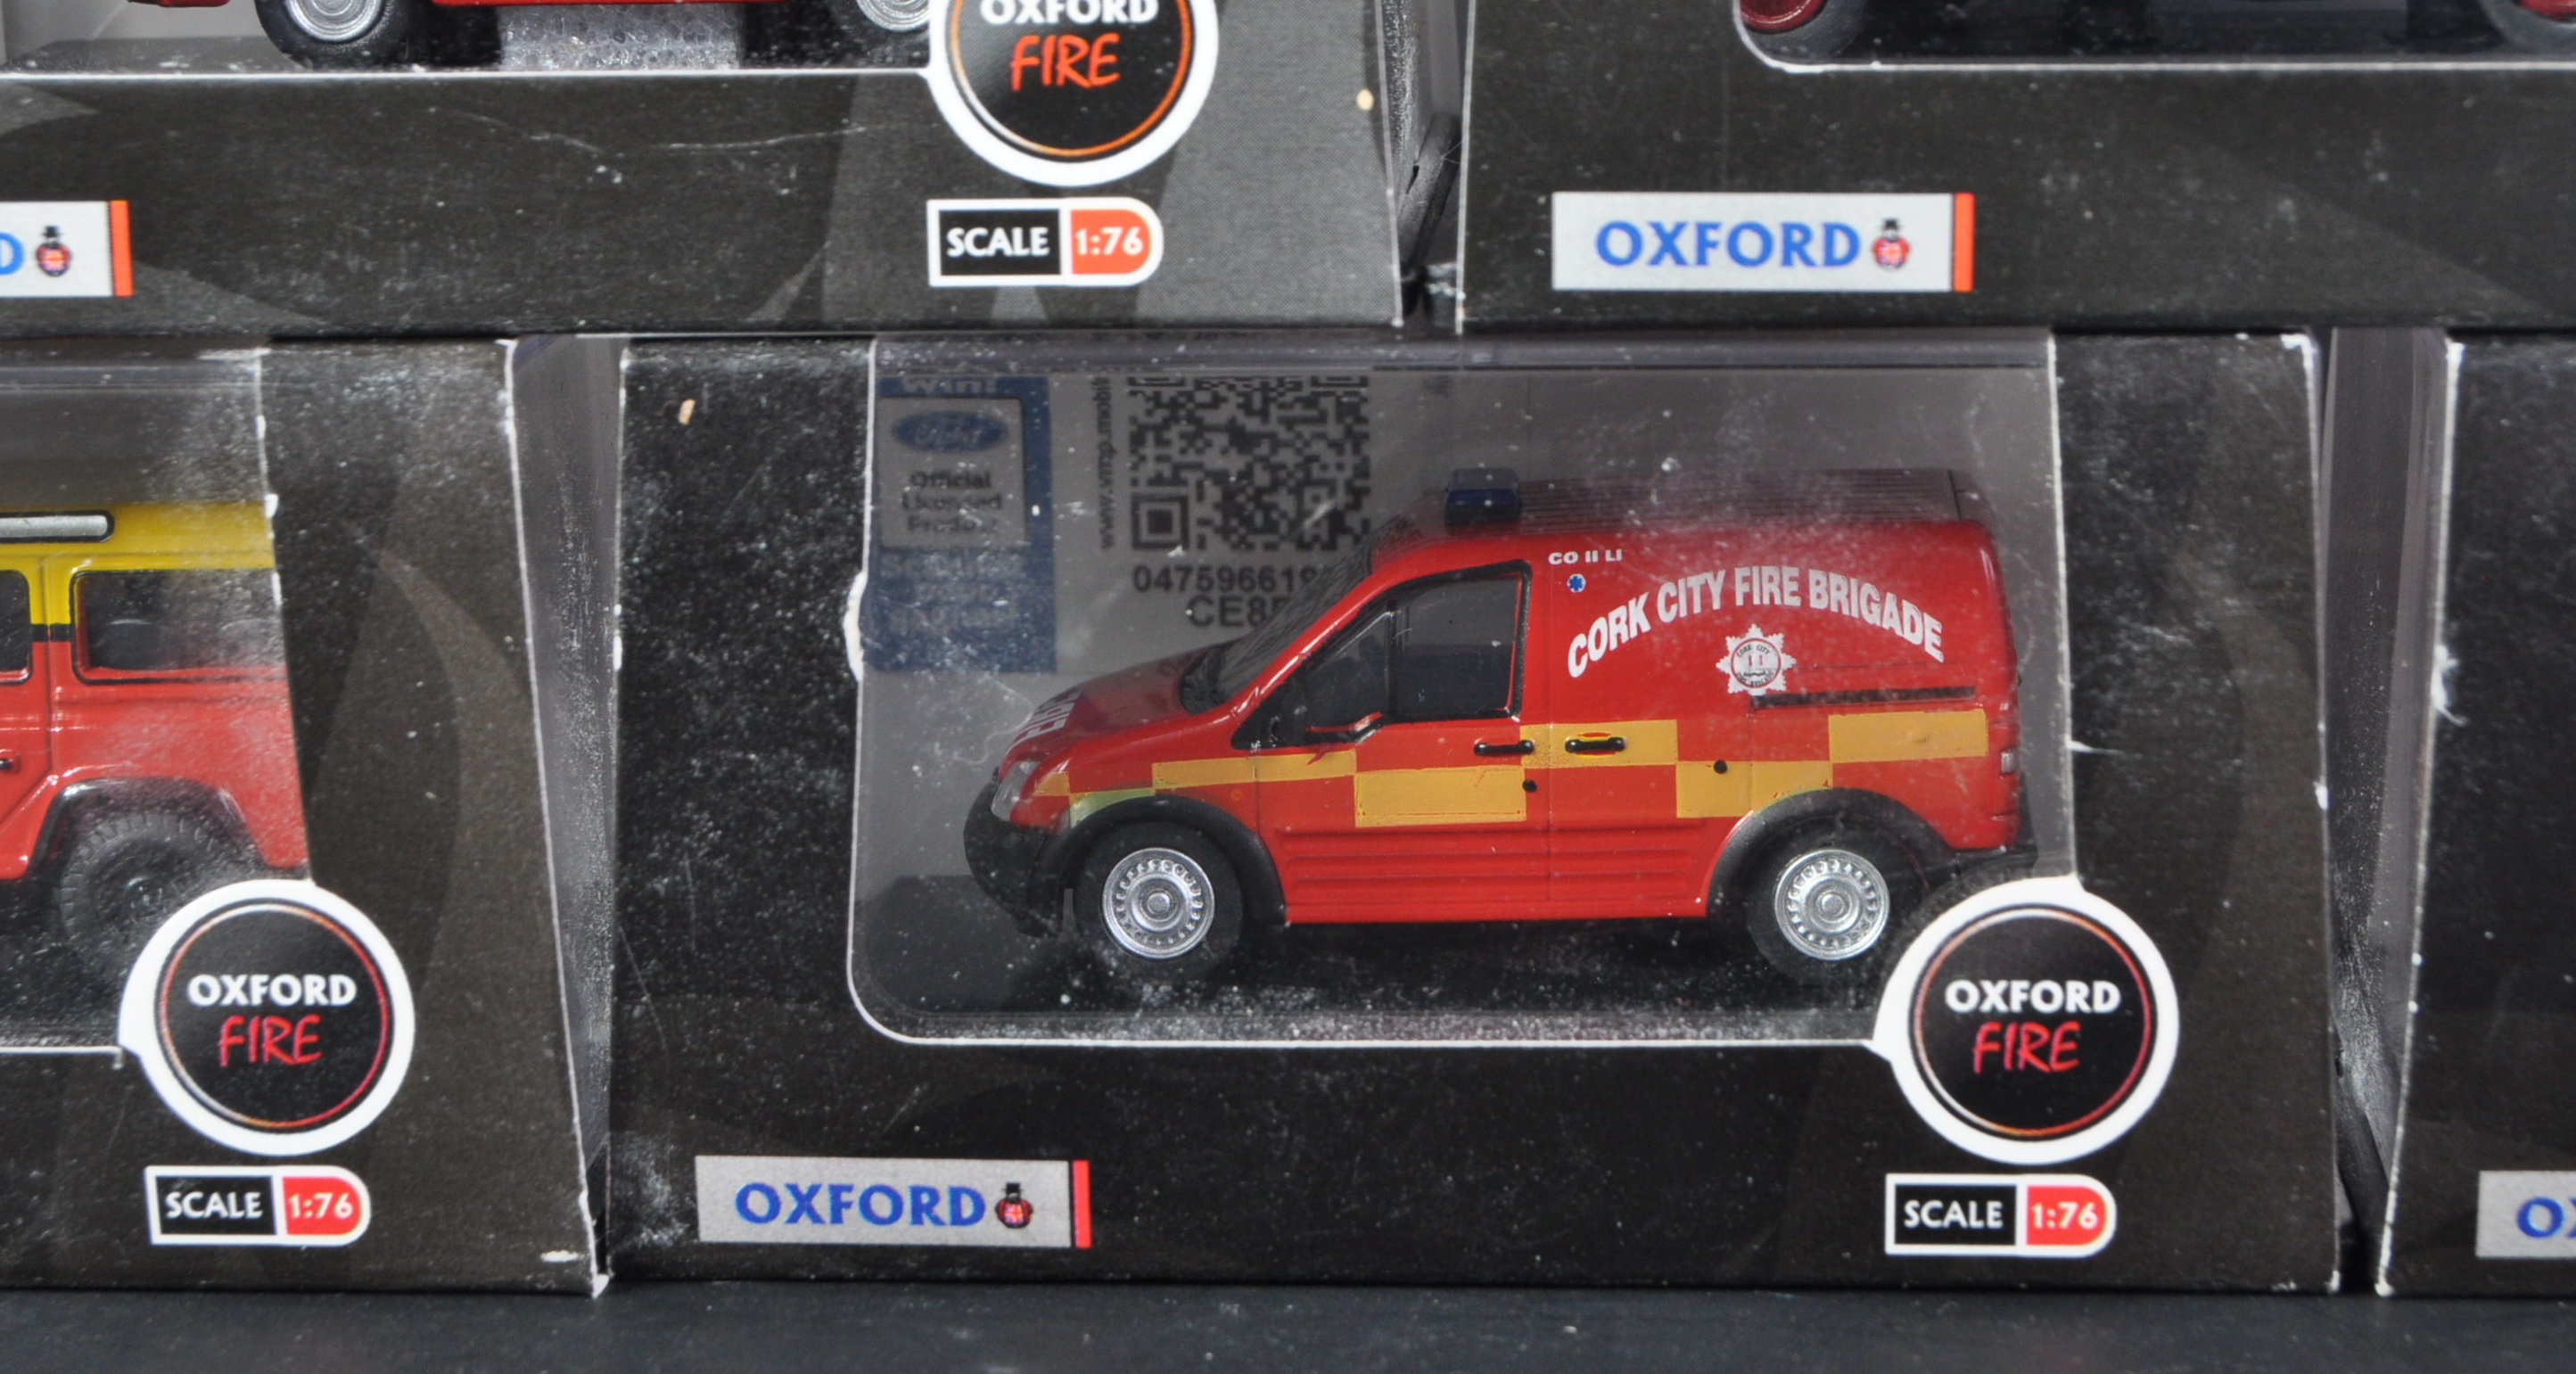 COLLECTION OF ASSORTED 1/76 SCALE DIECAST MODEL FIRE ENGINE TRUCKS - Image 5 of 6